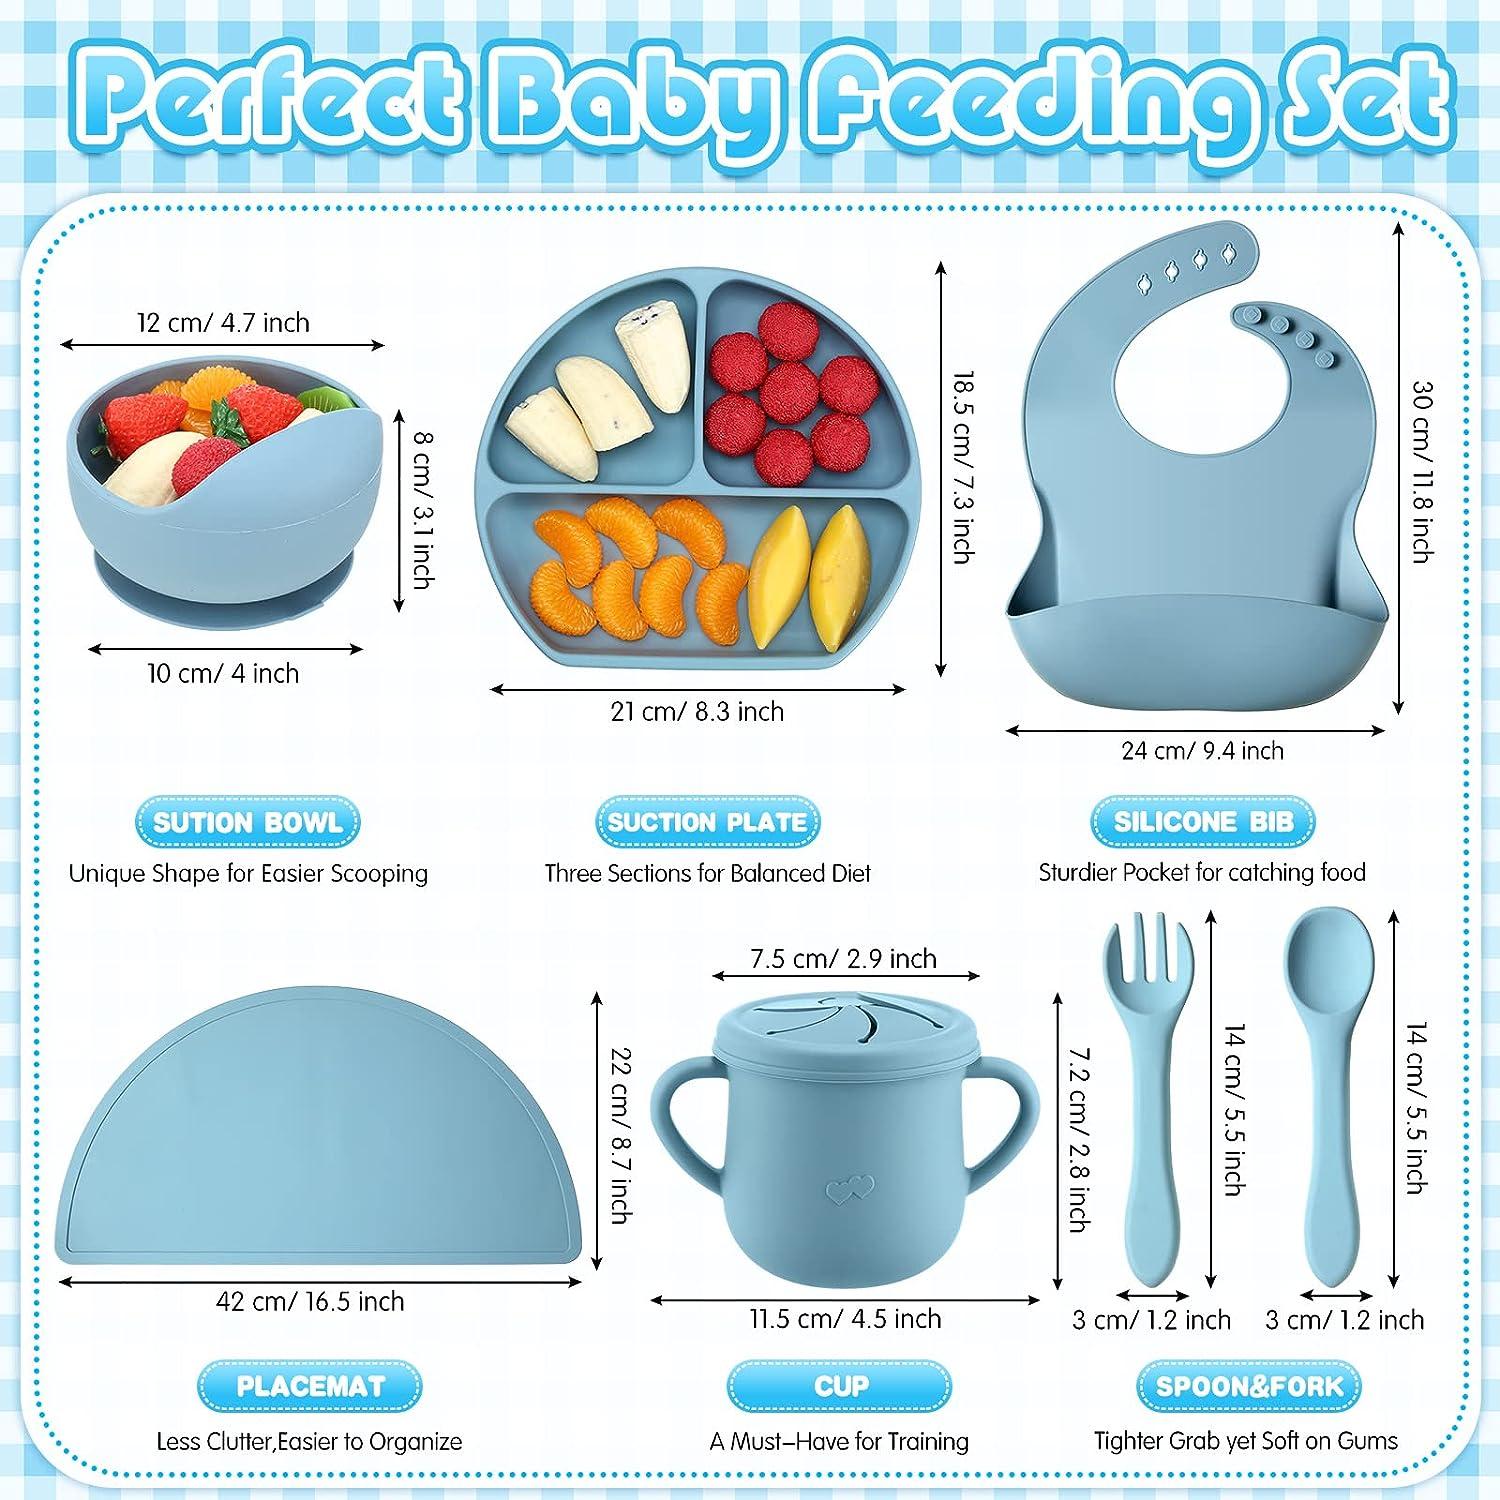 Silicone Baby Feeding Set | Baby Led Weaning Supplies Set Includes Divided  Plate with Suction, Baby Spoon Fork Self Feeding | Baby Toddler Eating